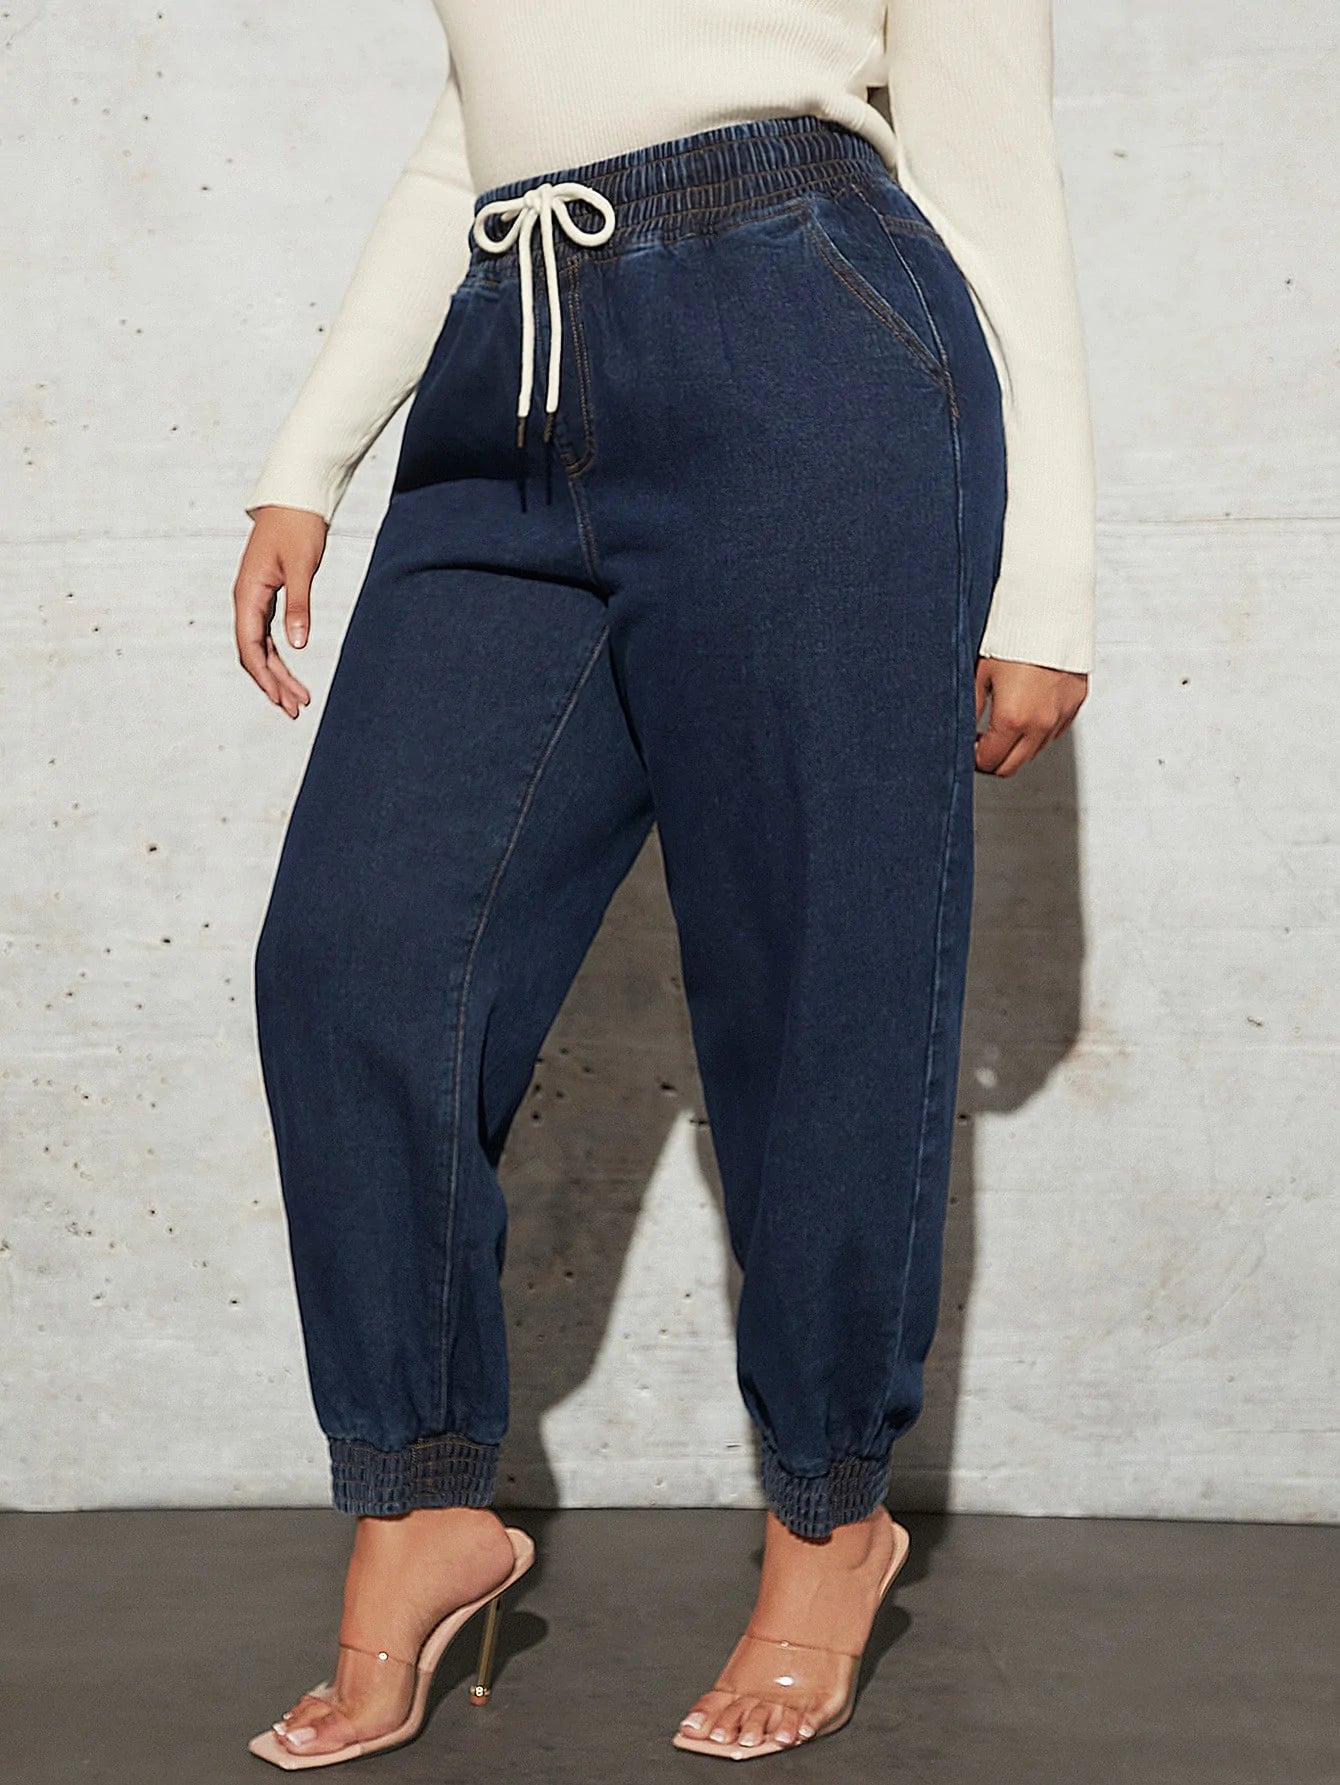 taglie forti Jeans jogger con coulisse